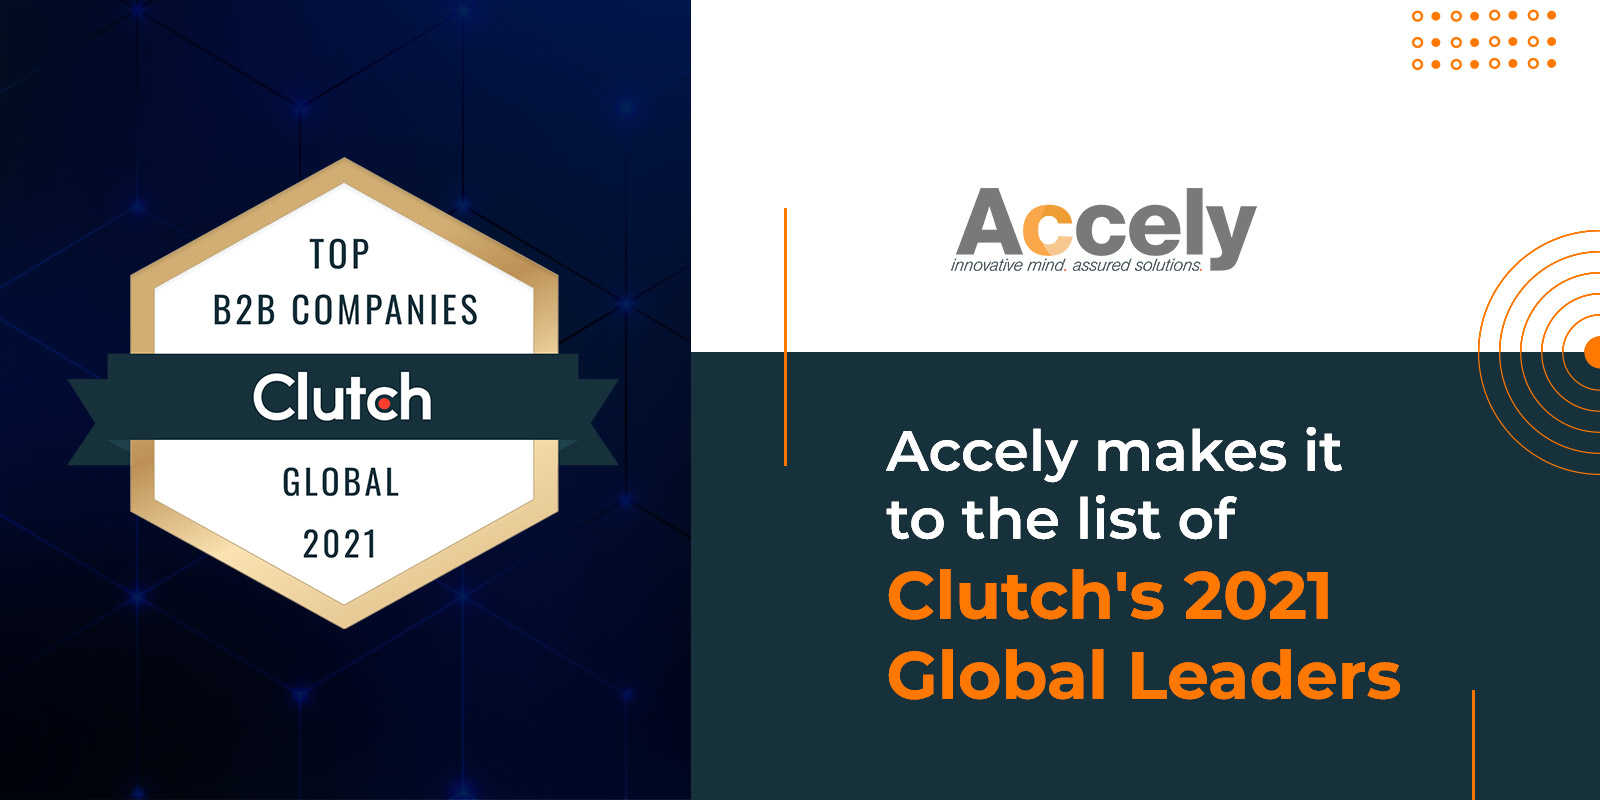 Accely makes it to the list of Clutch's 2021 Global Leaders